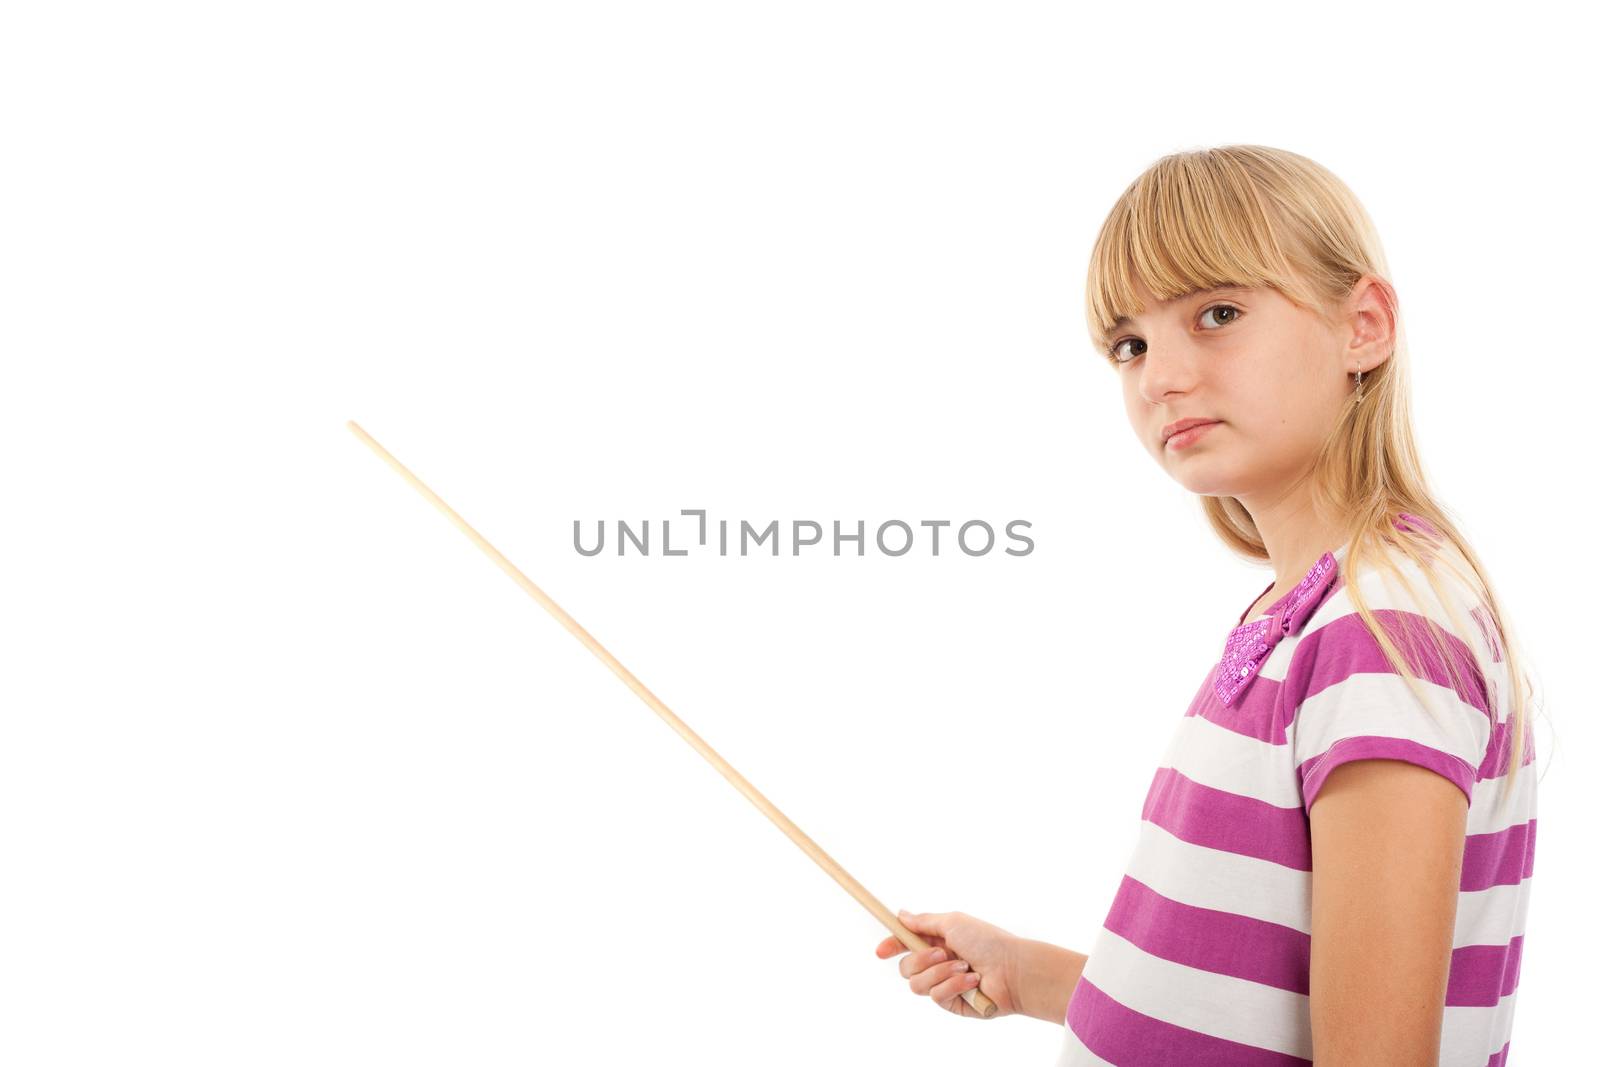 Young female holding a pointing stick isolated on white background